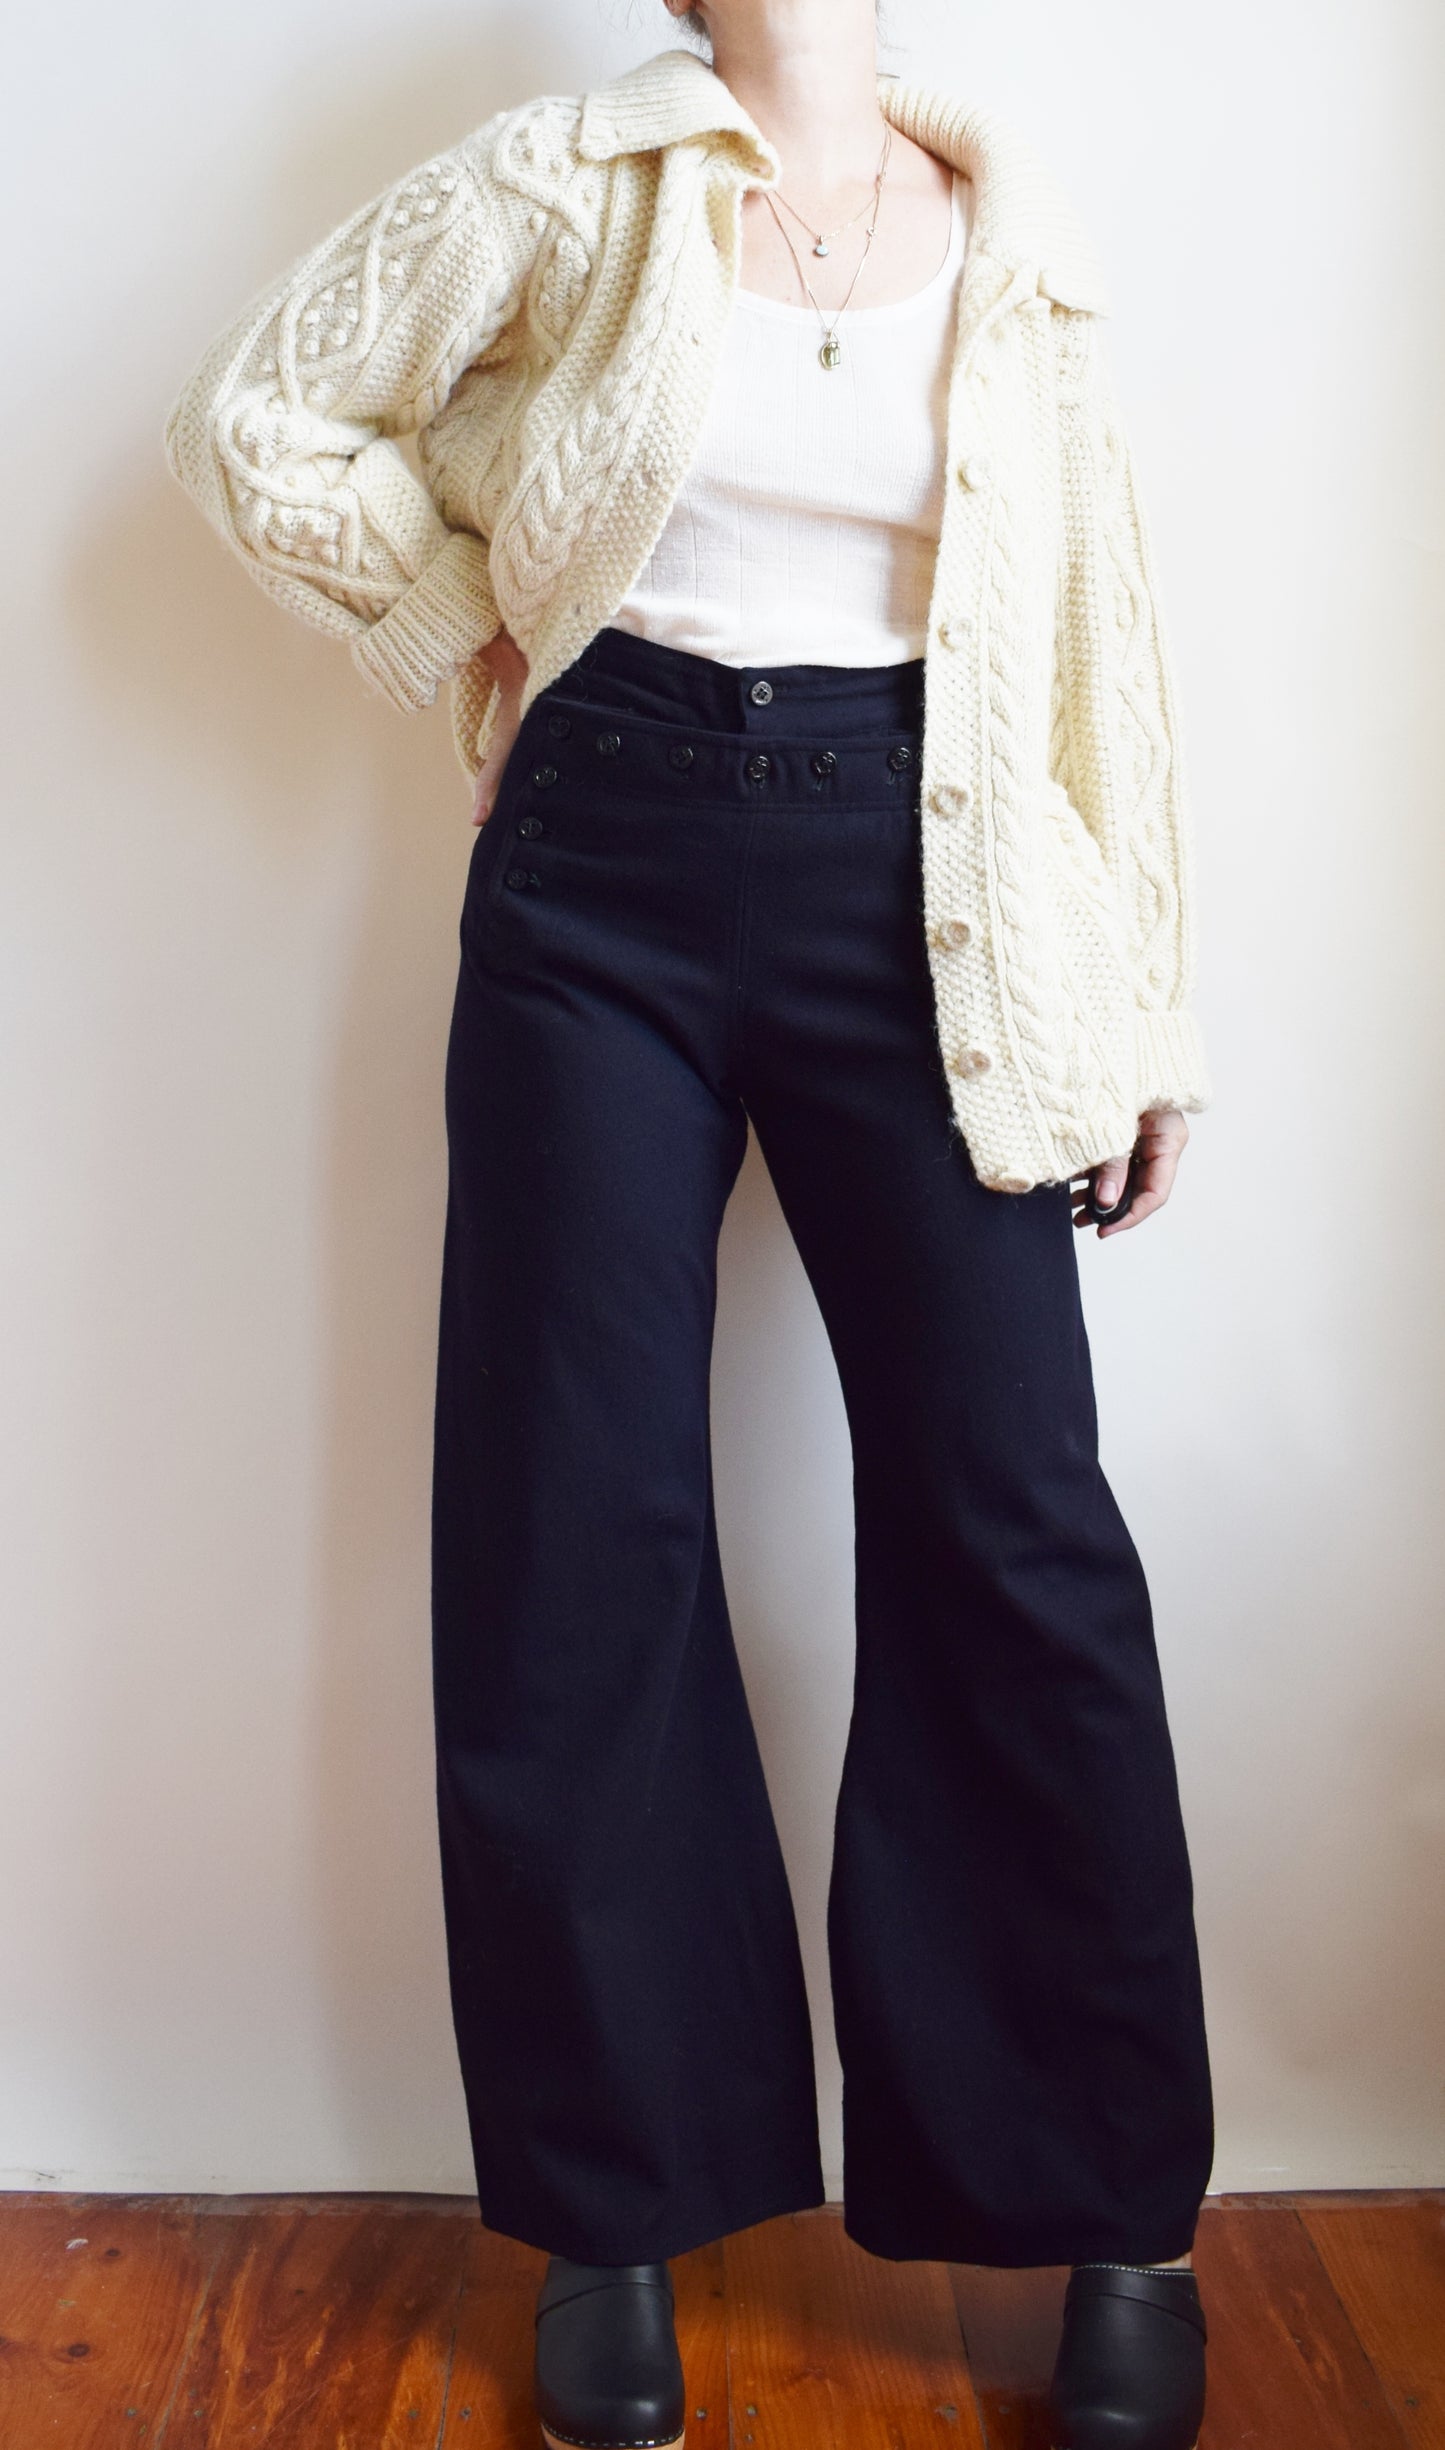 Came across these vintage sailor pants and can't find them anywhere! :  r/findfashion